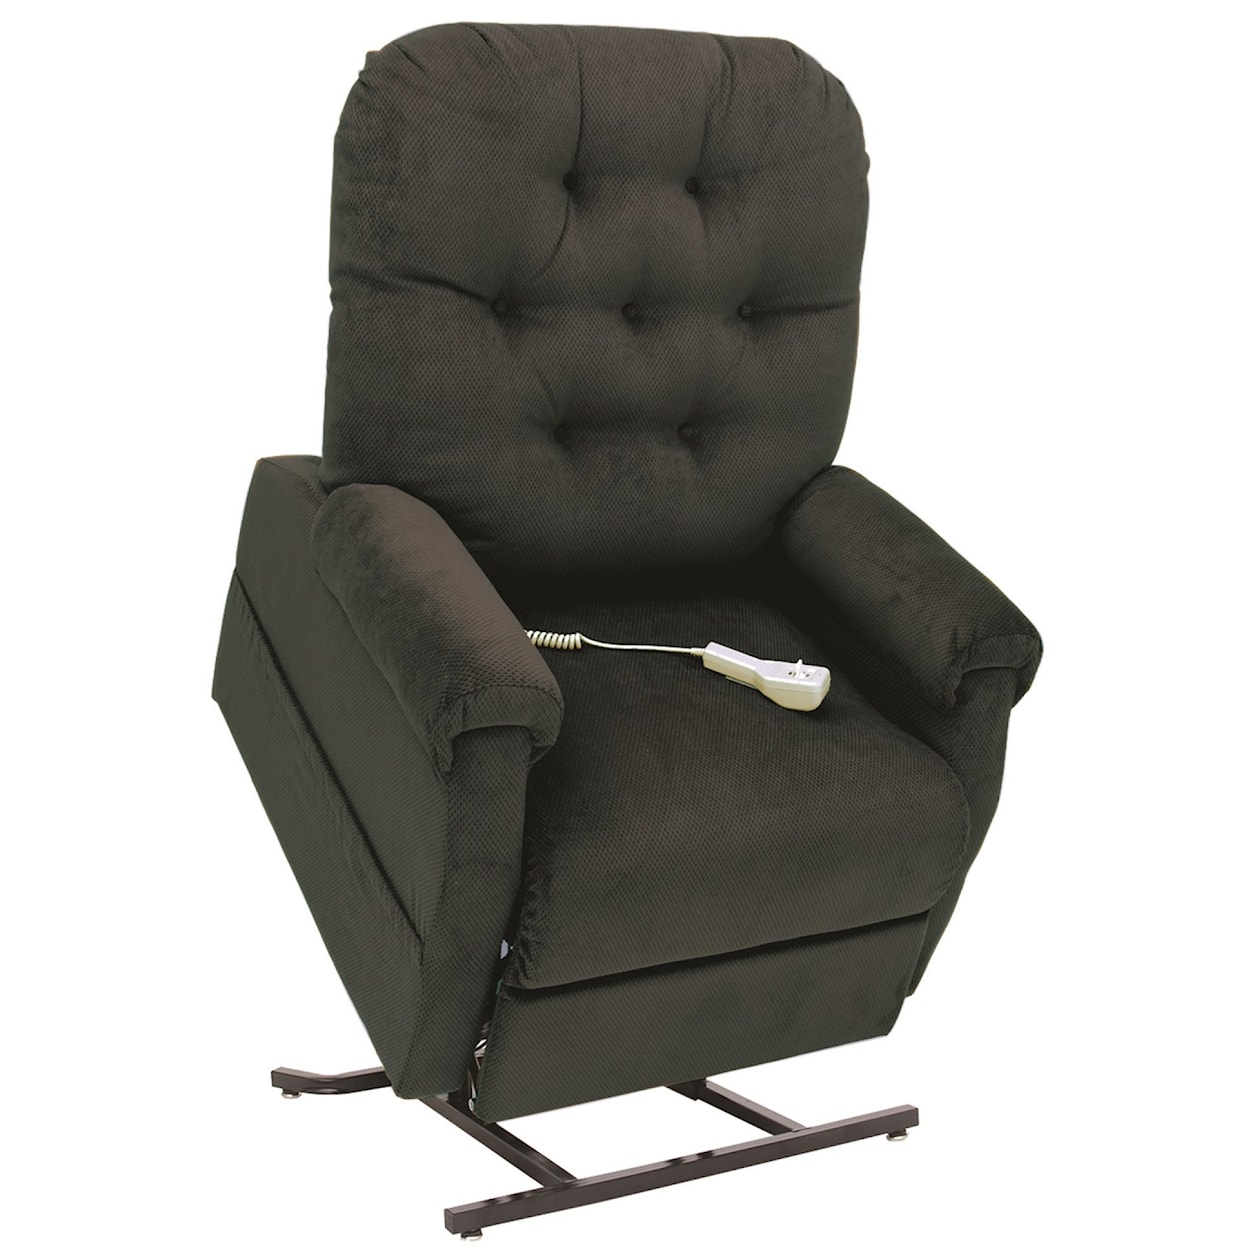 Windermere Motion Lift Chairs 3-Position Reclining Chaise Lounger